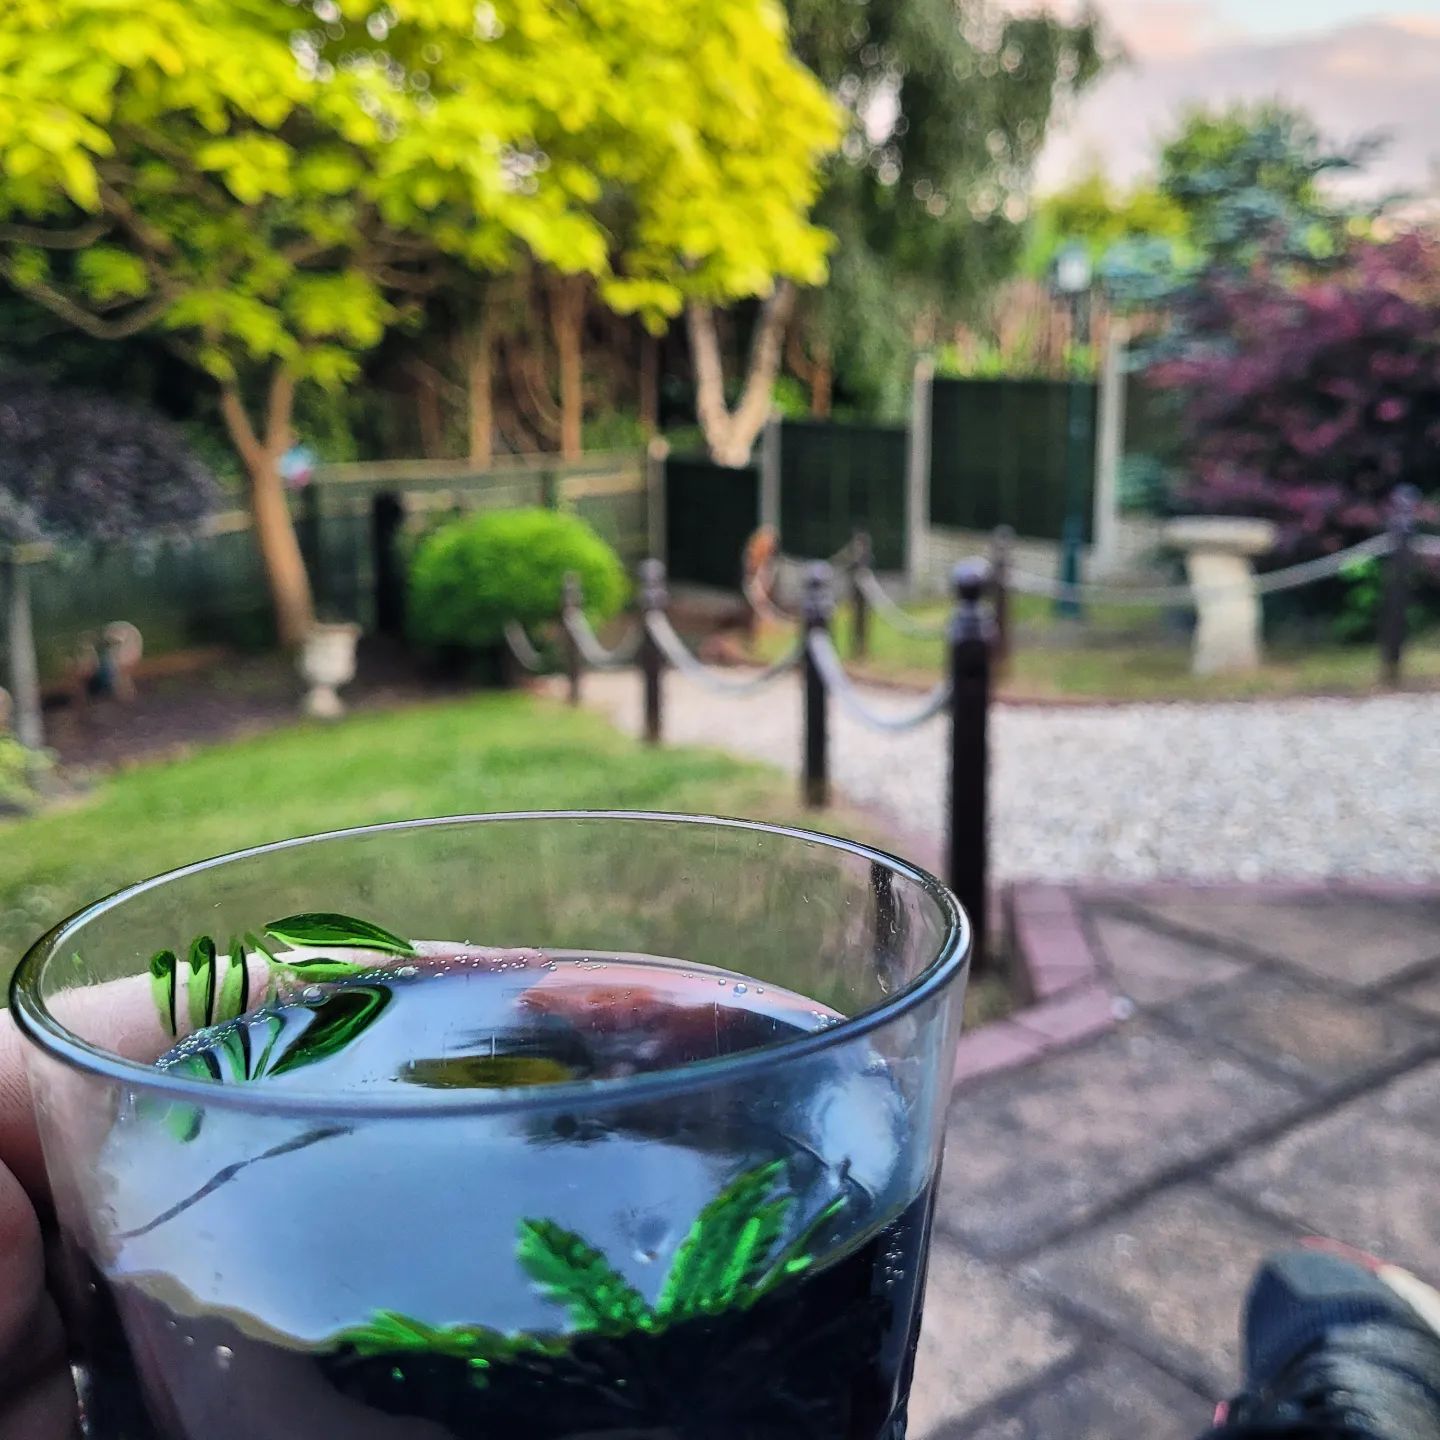 One from last night after I'd just managed to paint the replacement fence panels on the garden.
Well deserved rum and coke.
#NotAGardener